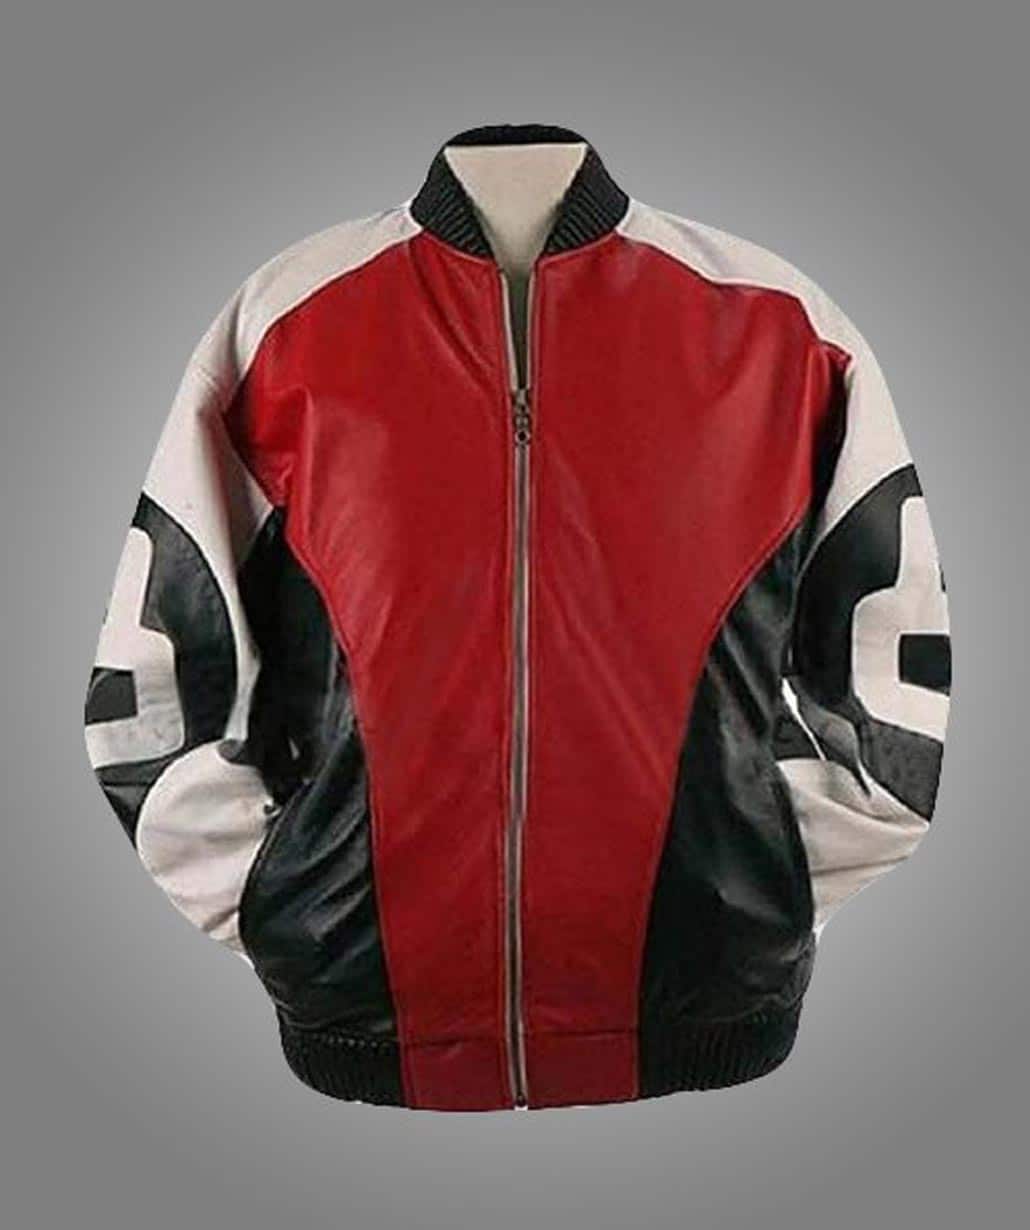 8-Ball-Red-Black-and-White-Leather-Jacket-Sale